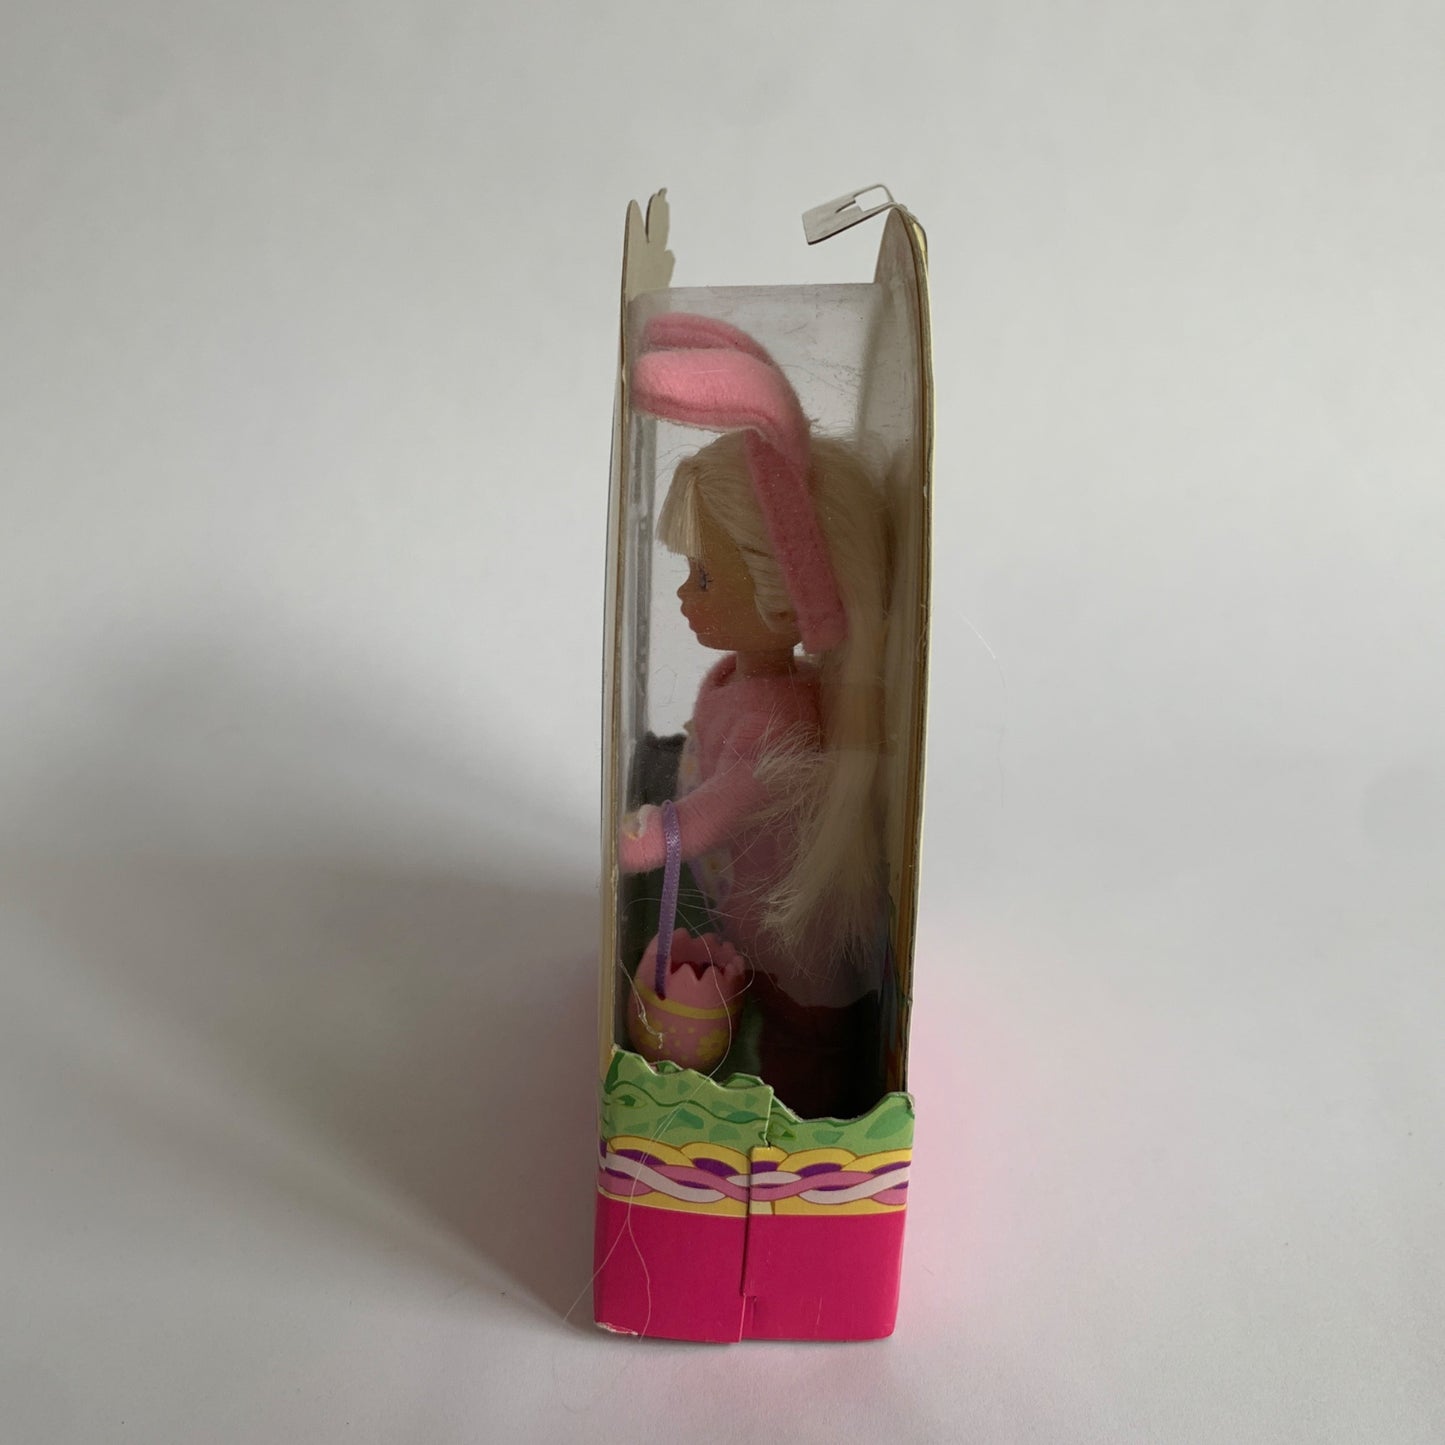 Kelly Easter Party Doll Vintage New in Box